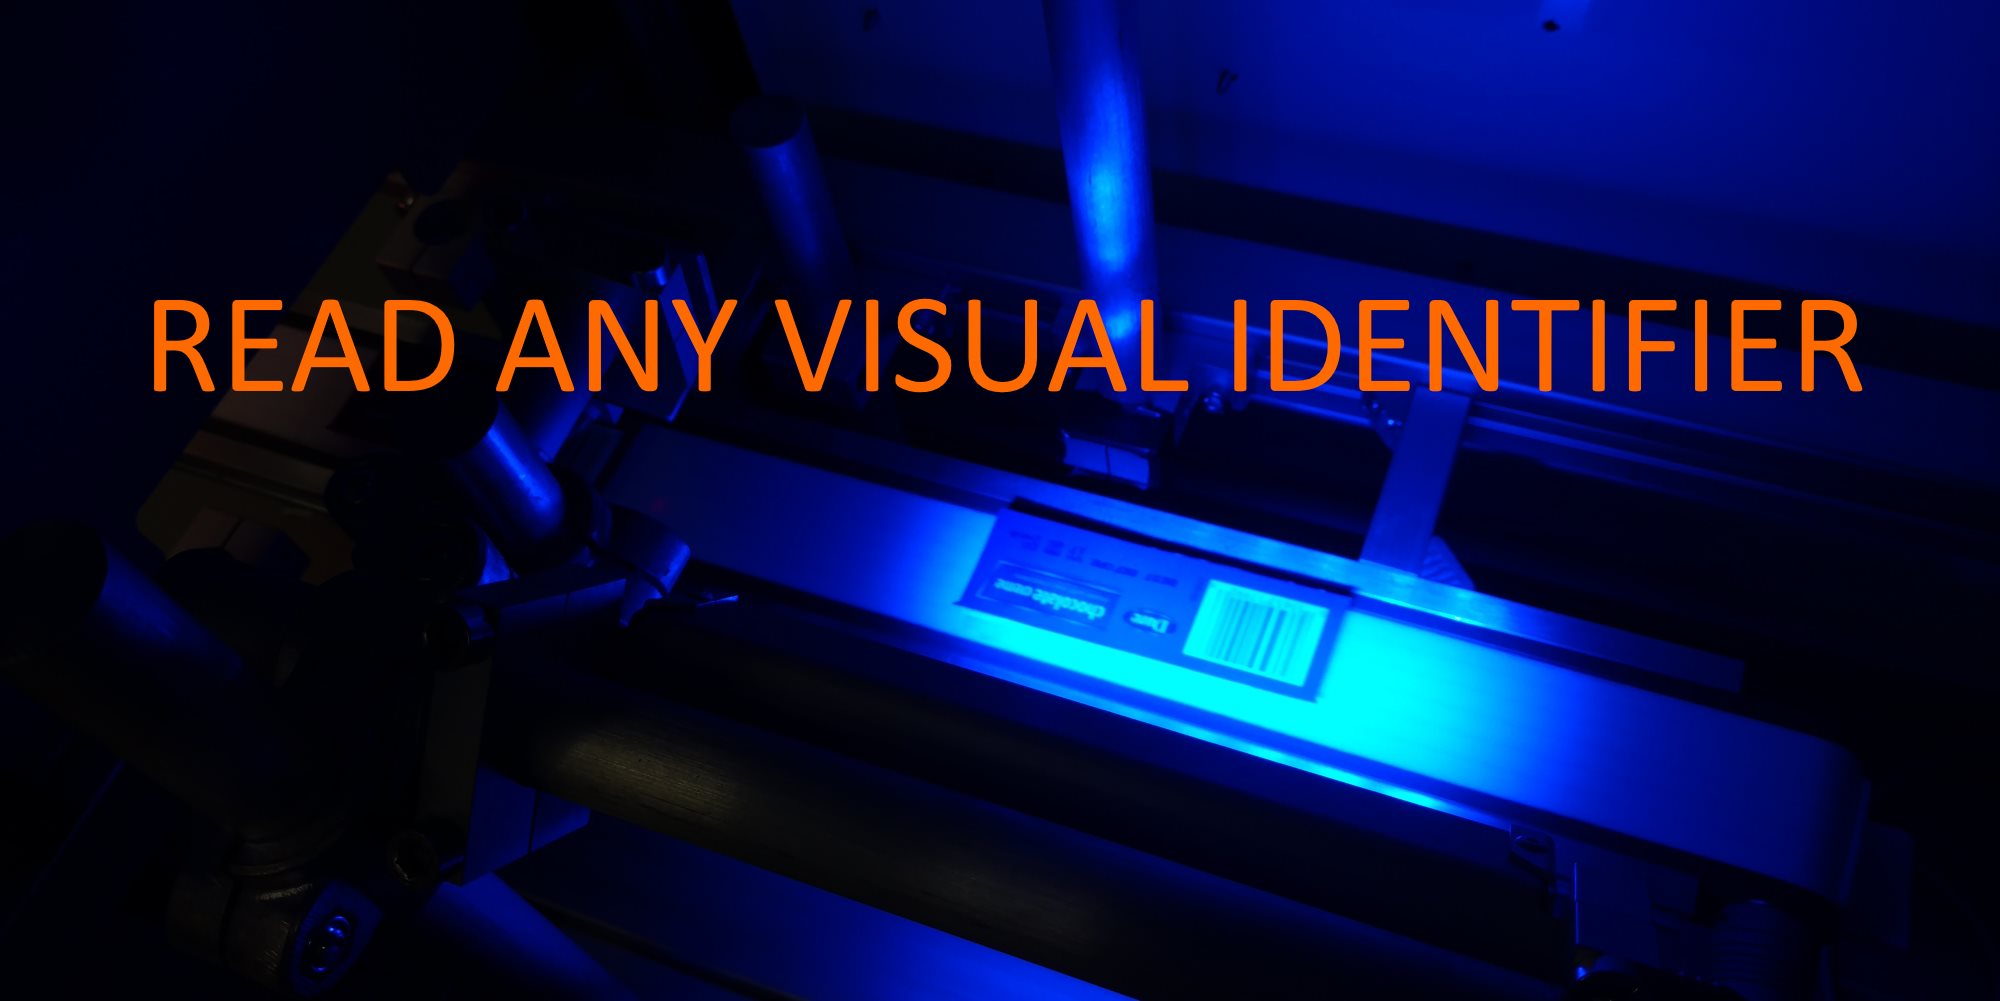 Read any visual identifier: text, barcode, patterns, color